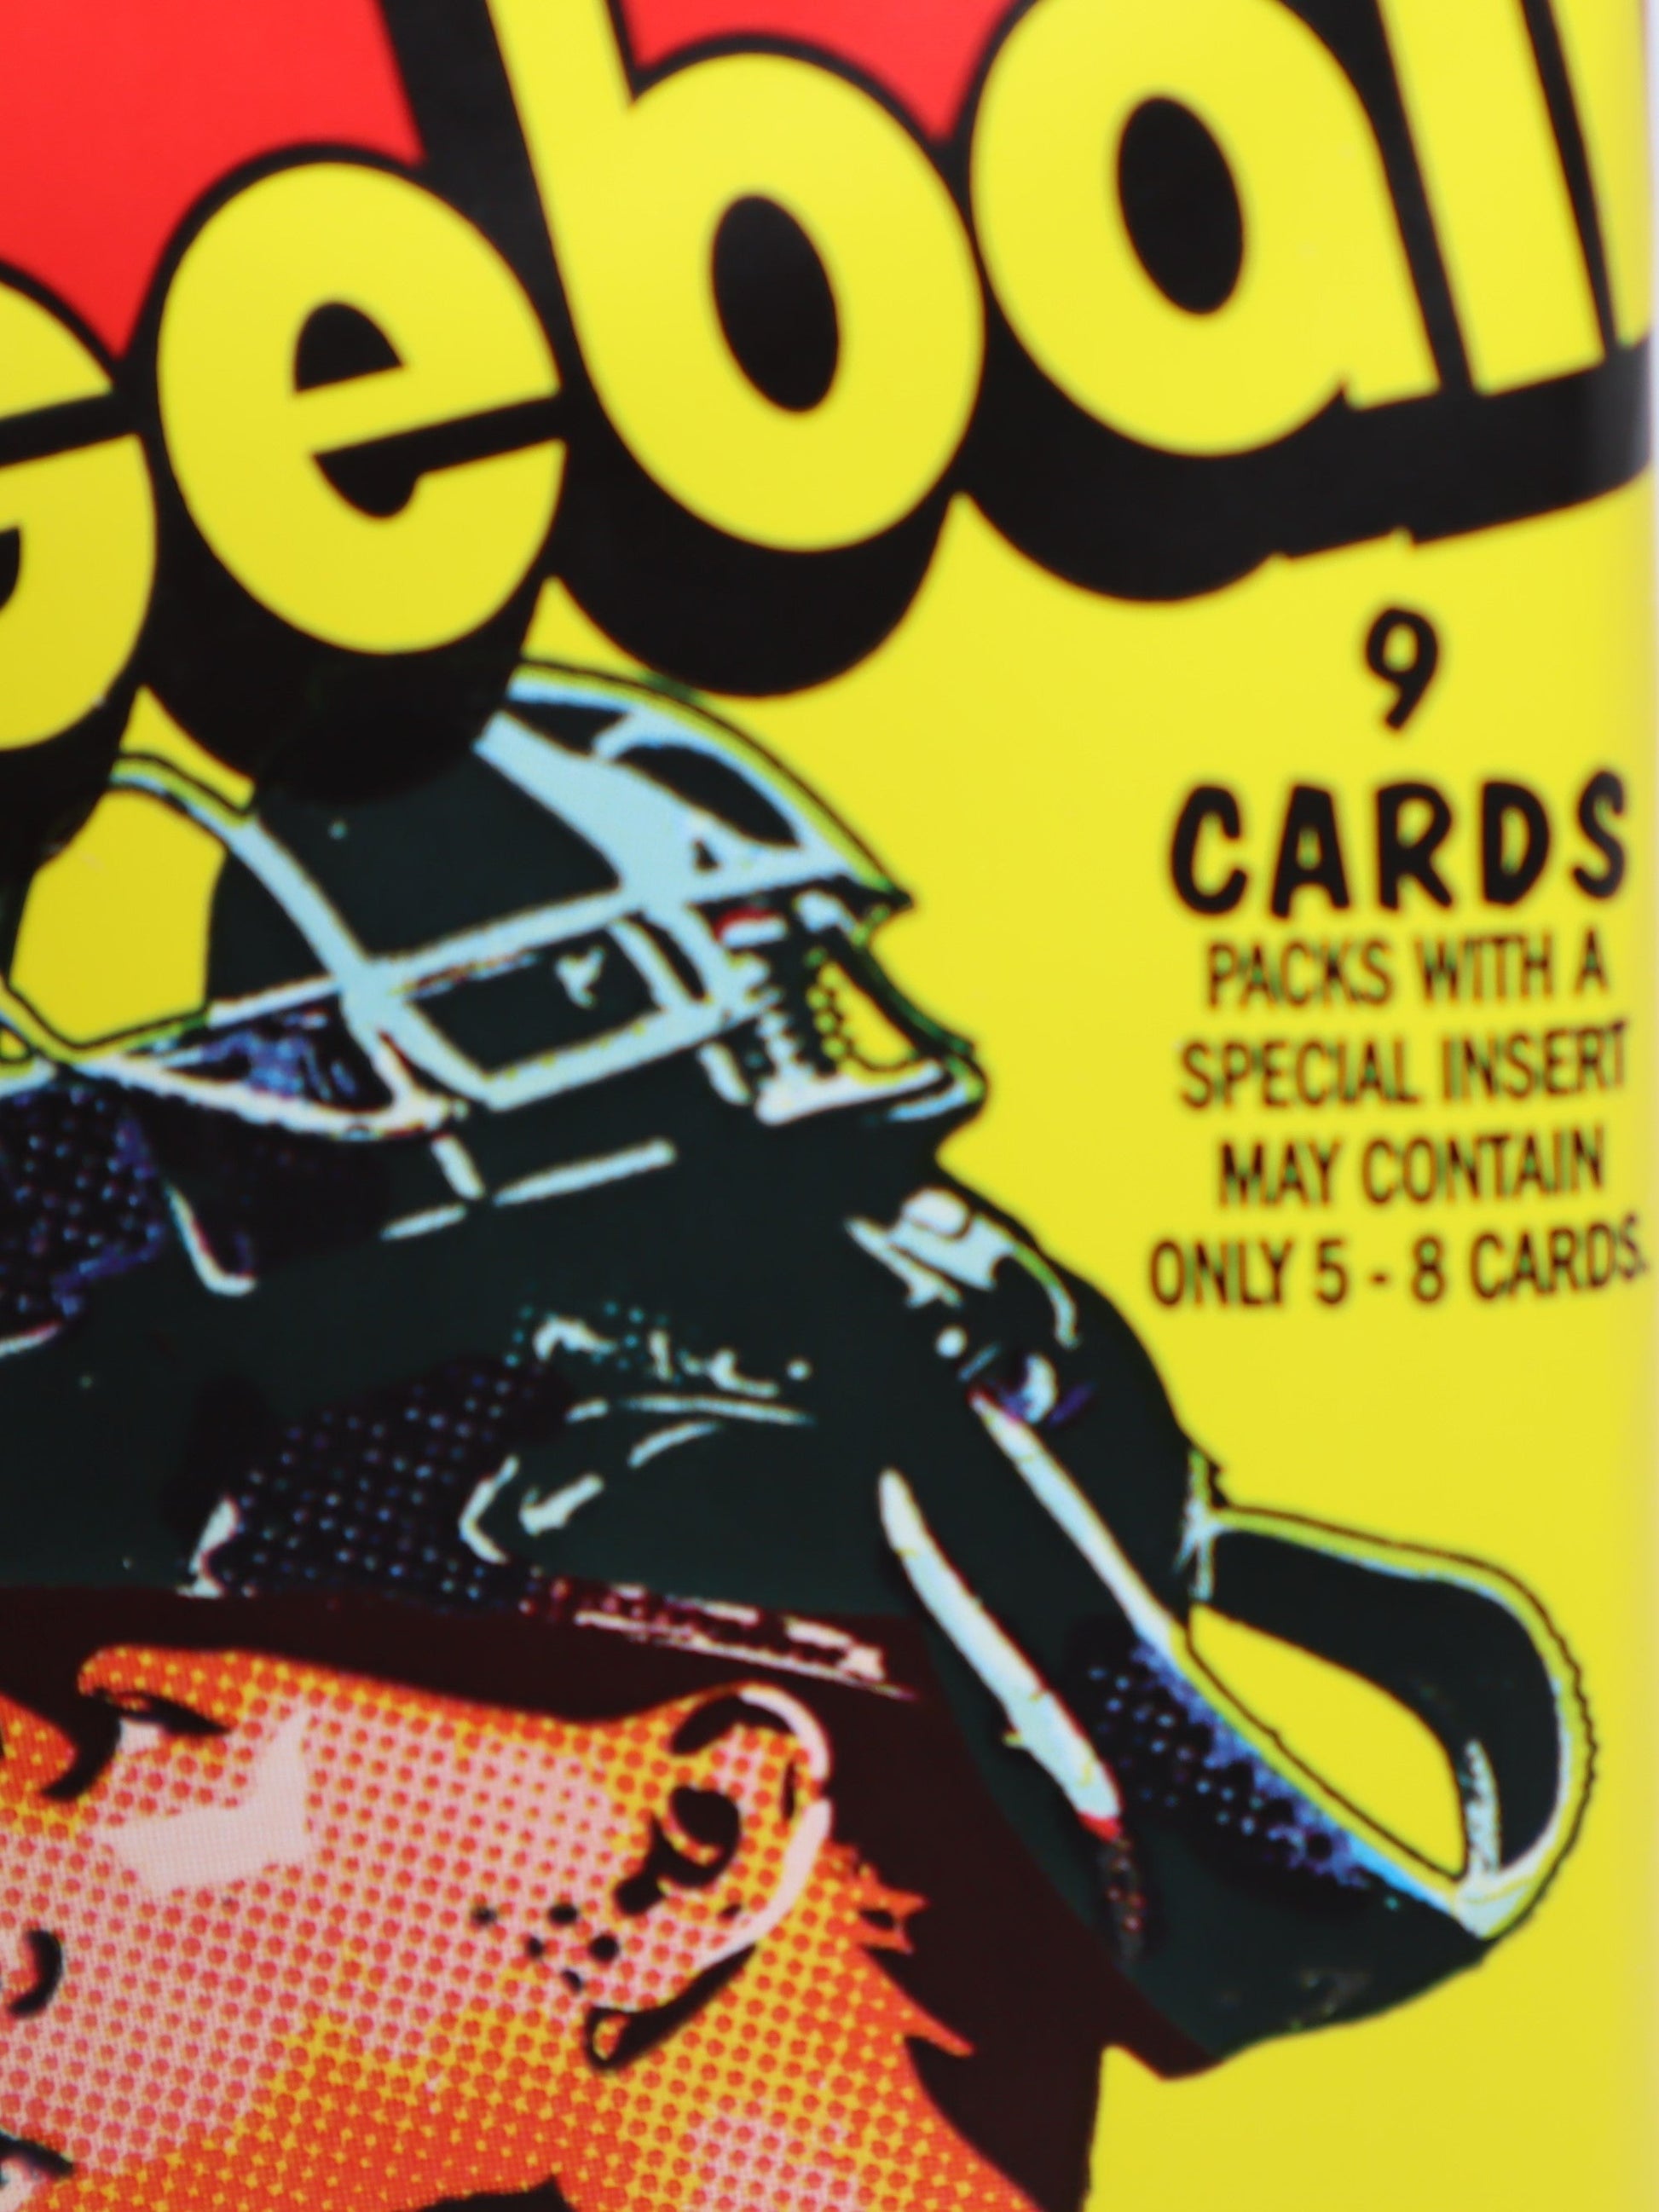 2022 Topps Heritage Baseball Cards Blaster Box Wax Pack - Collectibles